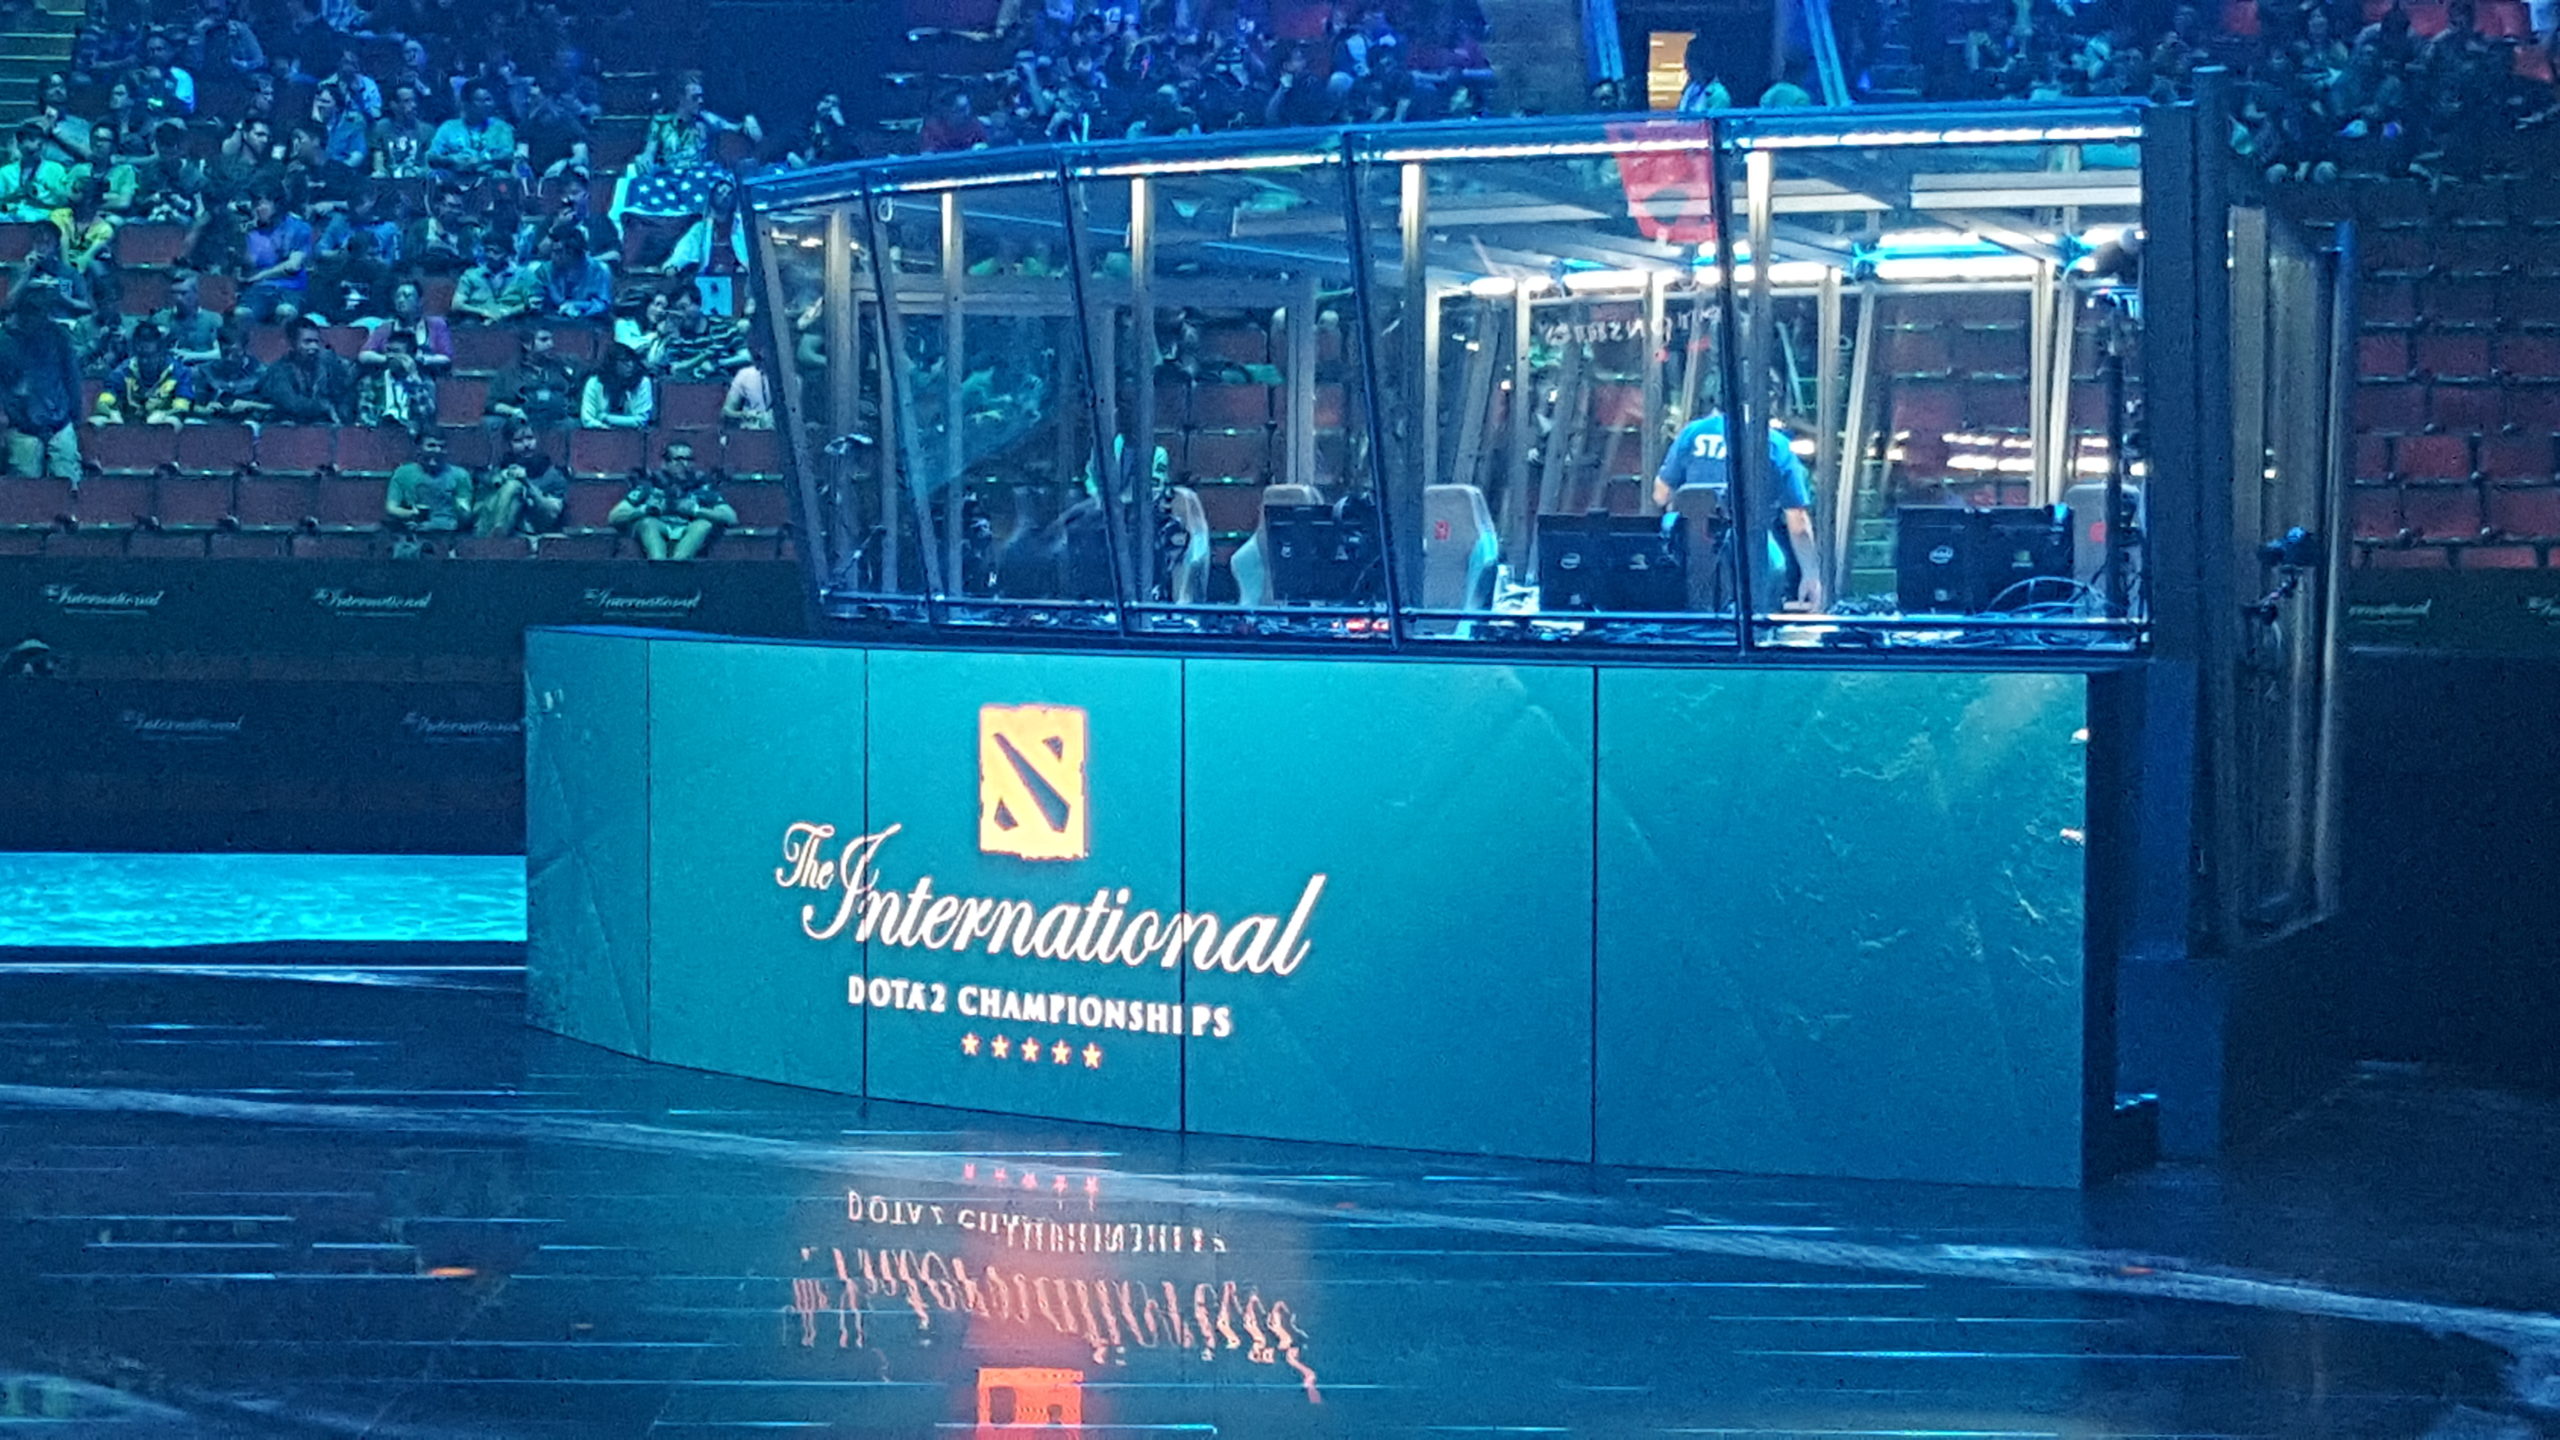 What It’s Like To Attend The Biggest Dota 2 Tournament In The World